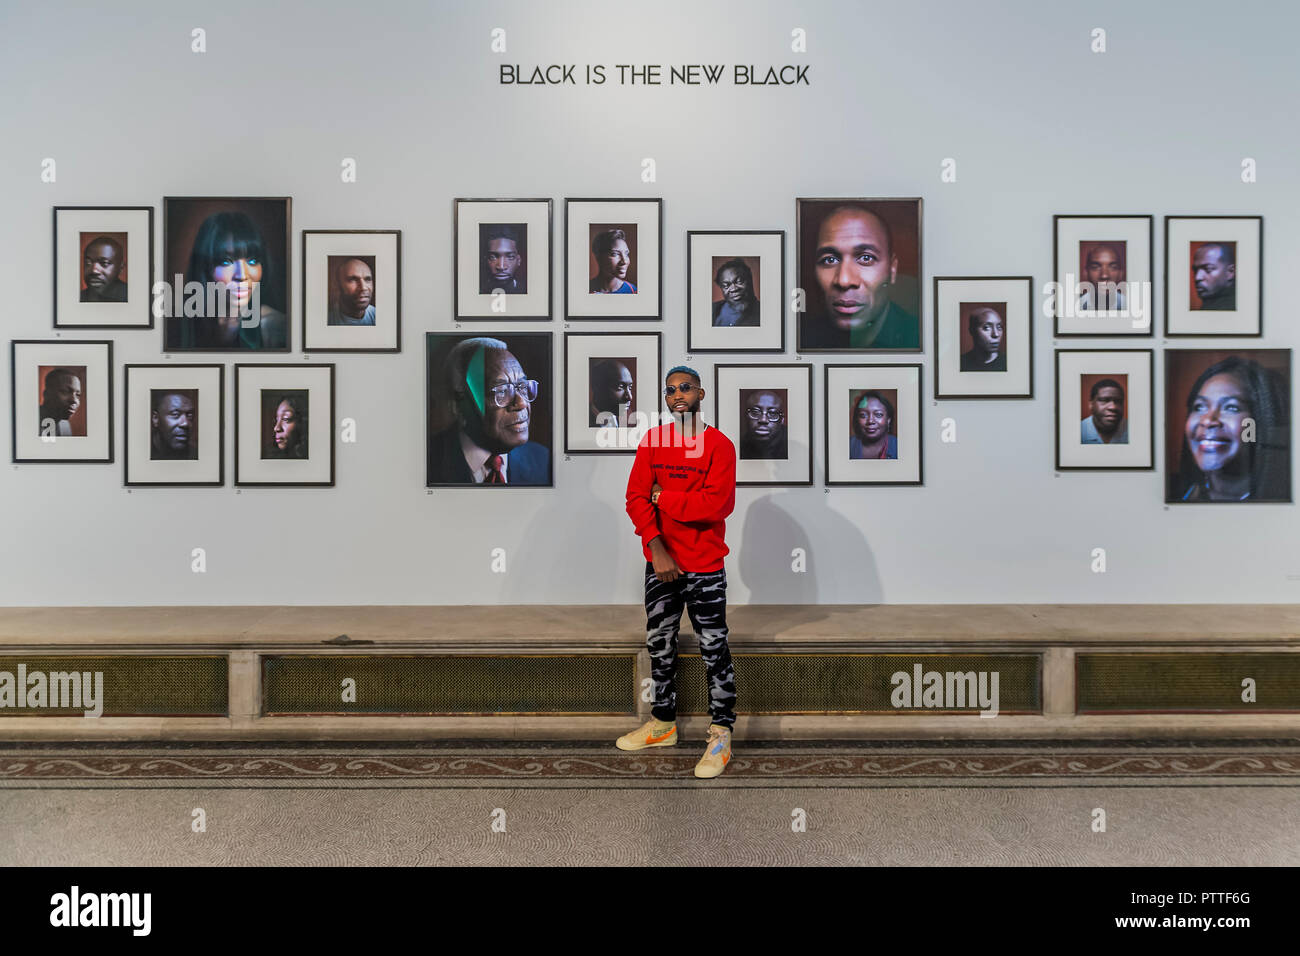 London, UK. 10th October, 2018. Tinie Tempah - Black is the New Black: Portraits by Simon Frederick at National Portrait Gallery, London, the Gallery’s largest acquisition of portraits of Afro-Caribbean (on display until 27 January 2019). Credit: Guy Bell/Alamy Live News Stock Photo